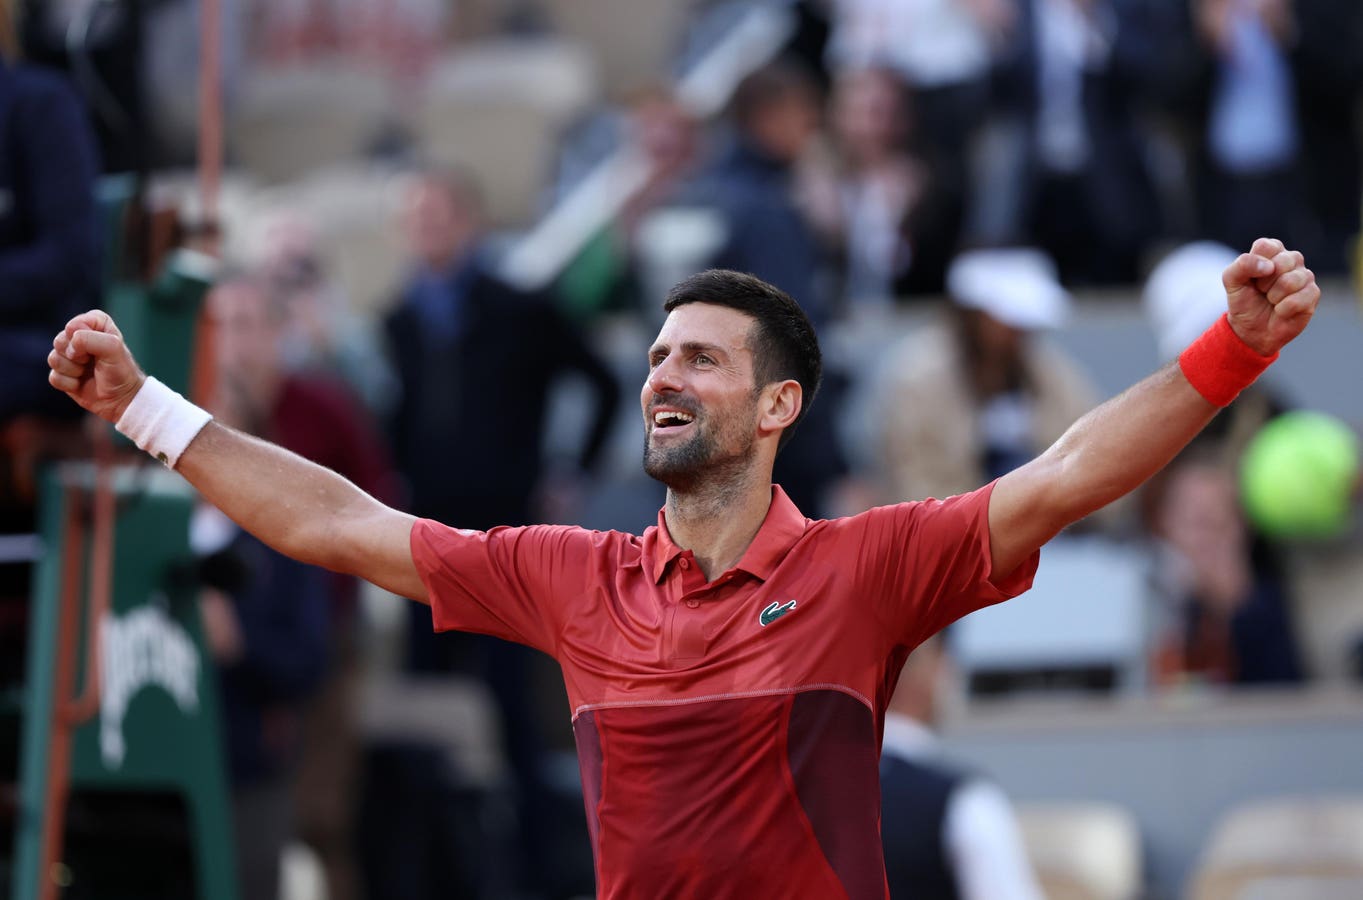 After Knee Injury, Novak Djokovic Uncertain If He’ll Play French Open Quarterfinal